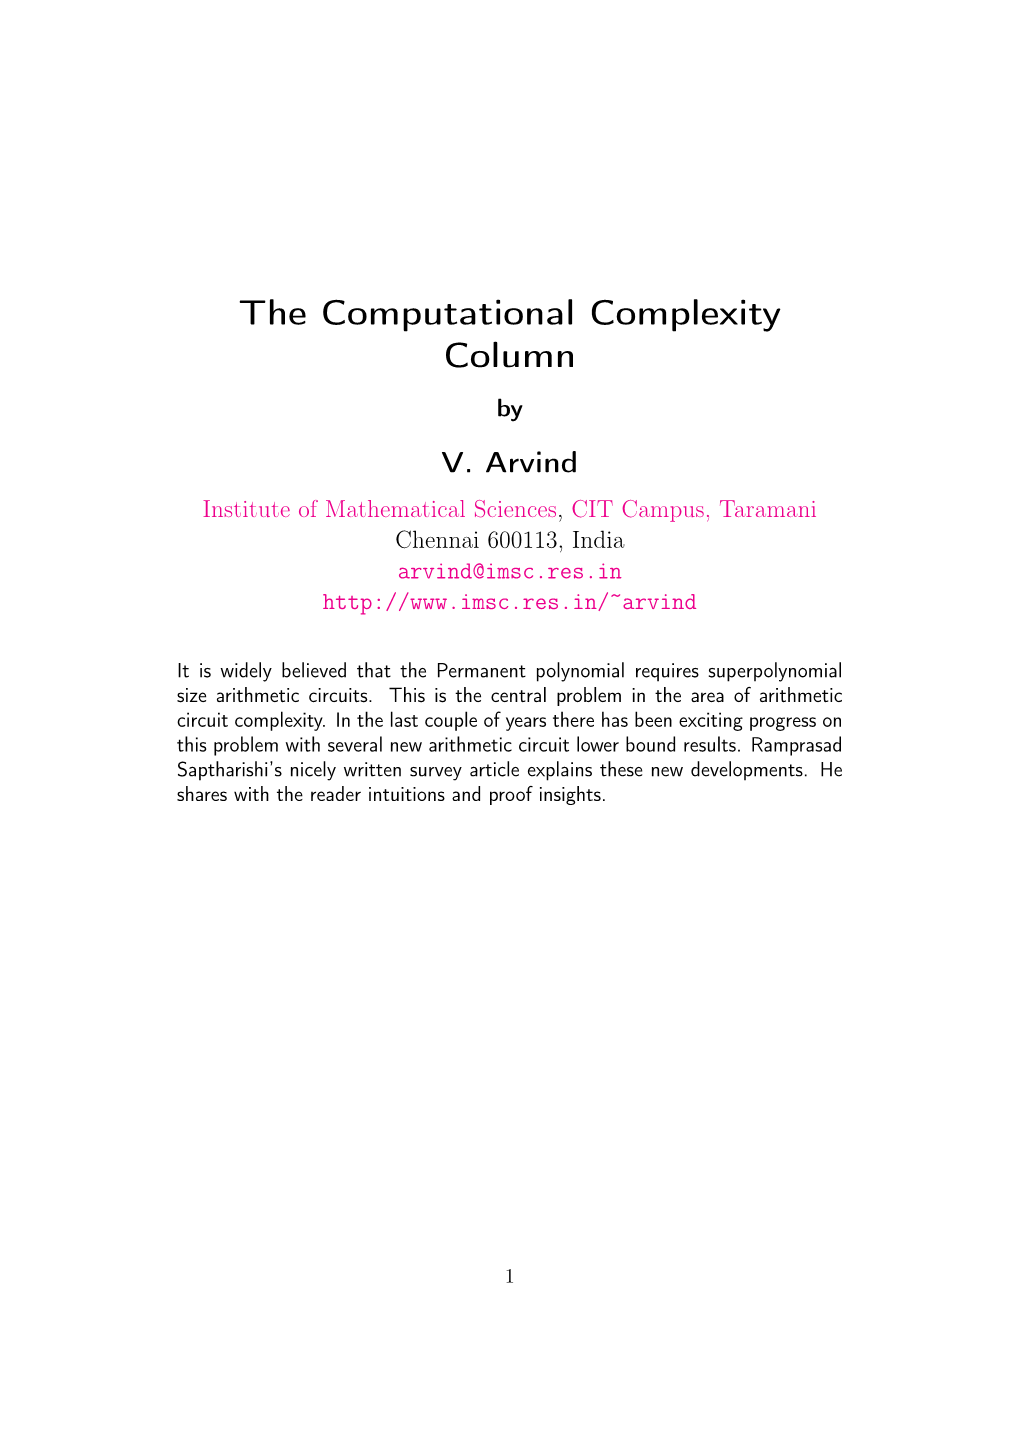 The Computational Complexity Column by V